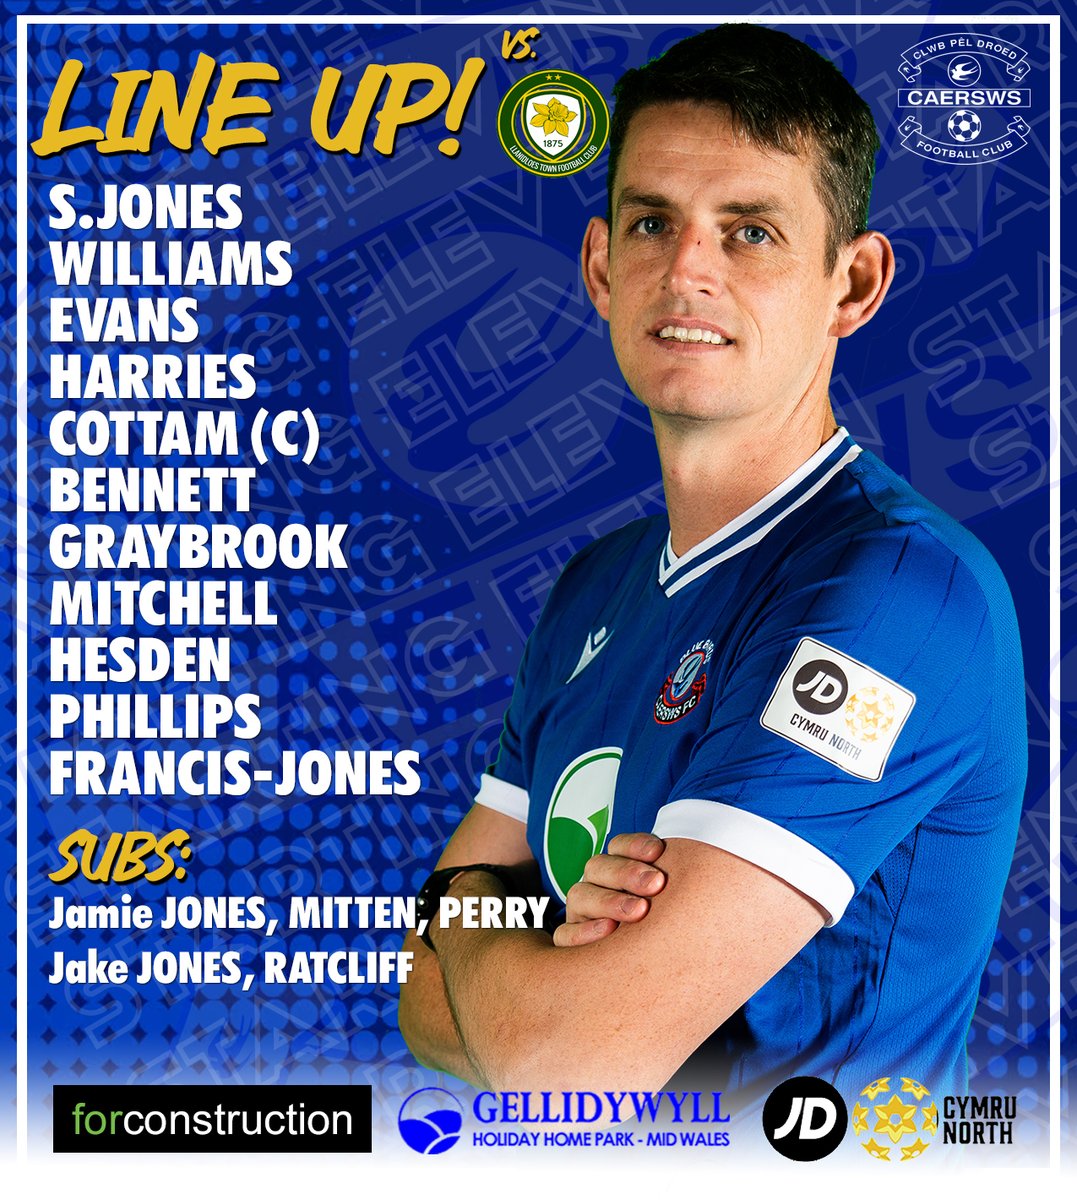 Here's how the Bluebirds line up for the final game of the season #Sws #bluebirds #JDCymruNorth